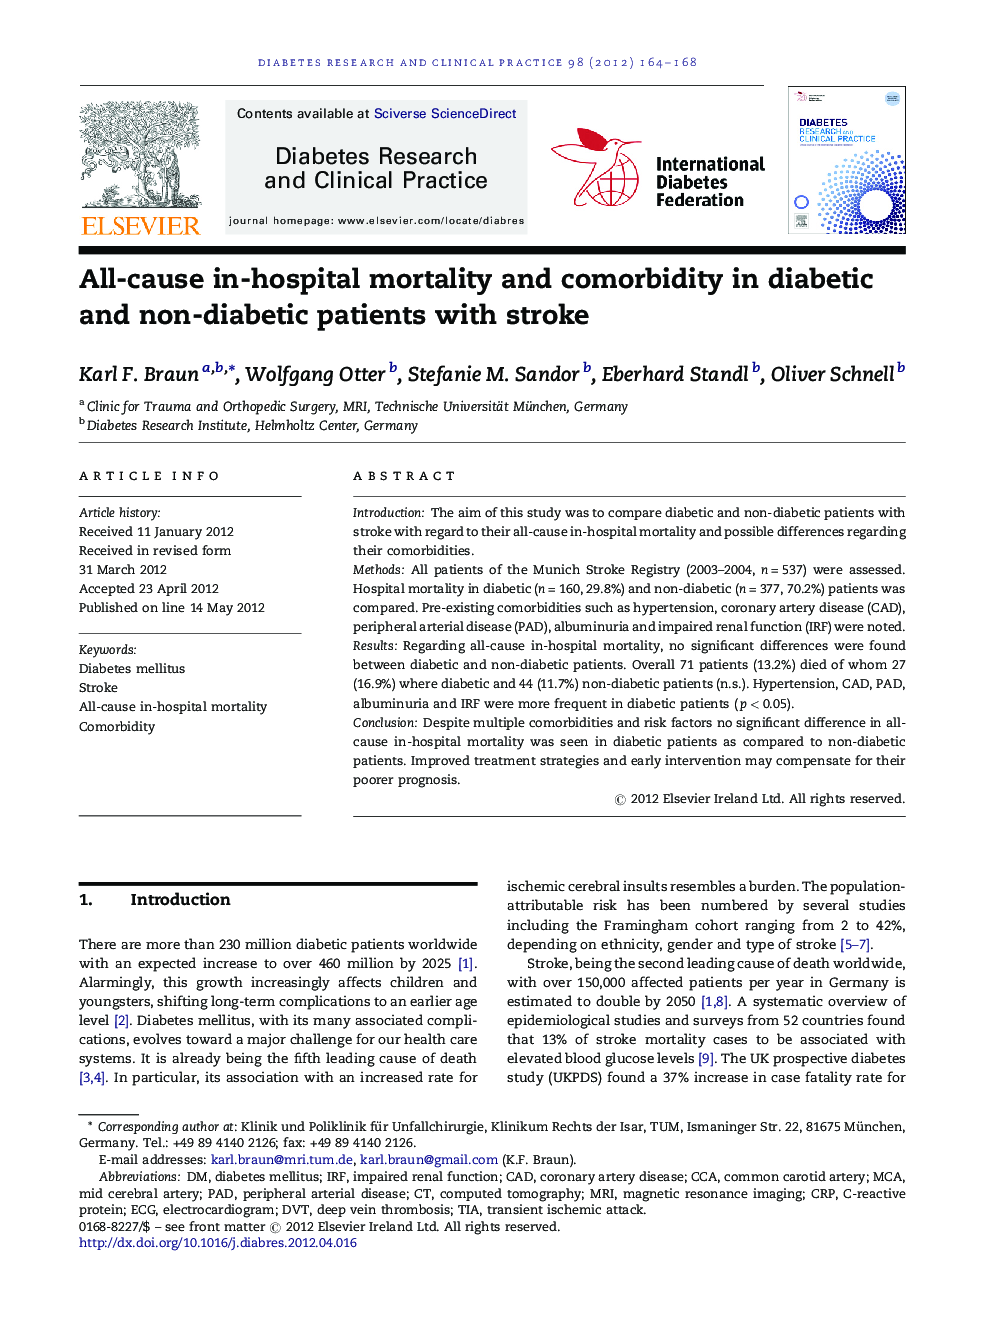 All-cause in-hospital mortality and comorbidity in diabetic and non-diabetic patients with stroke